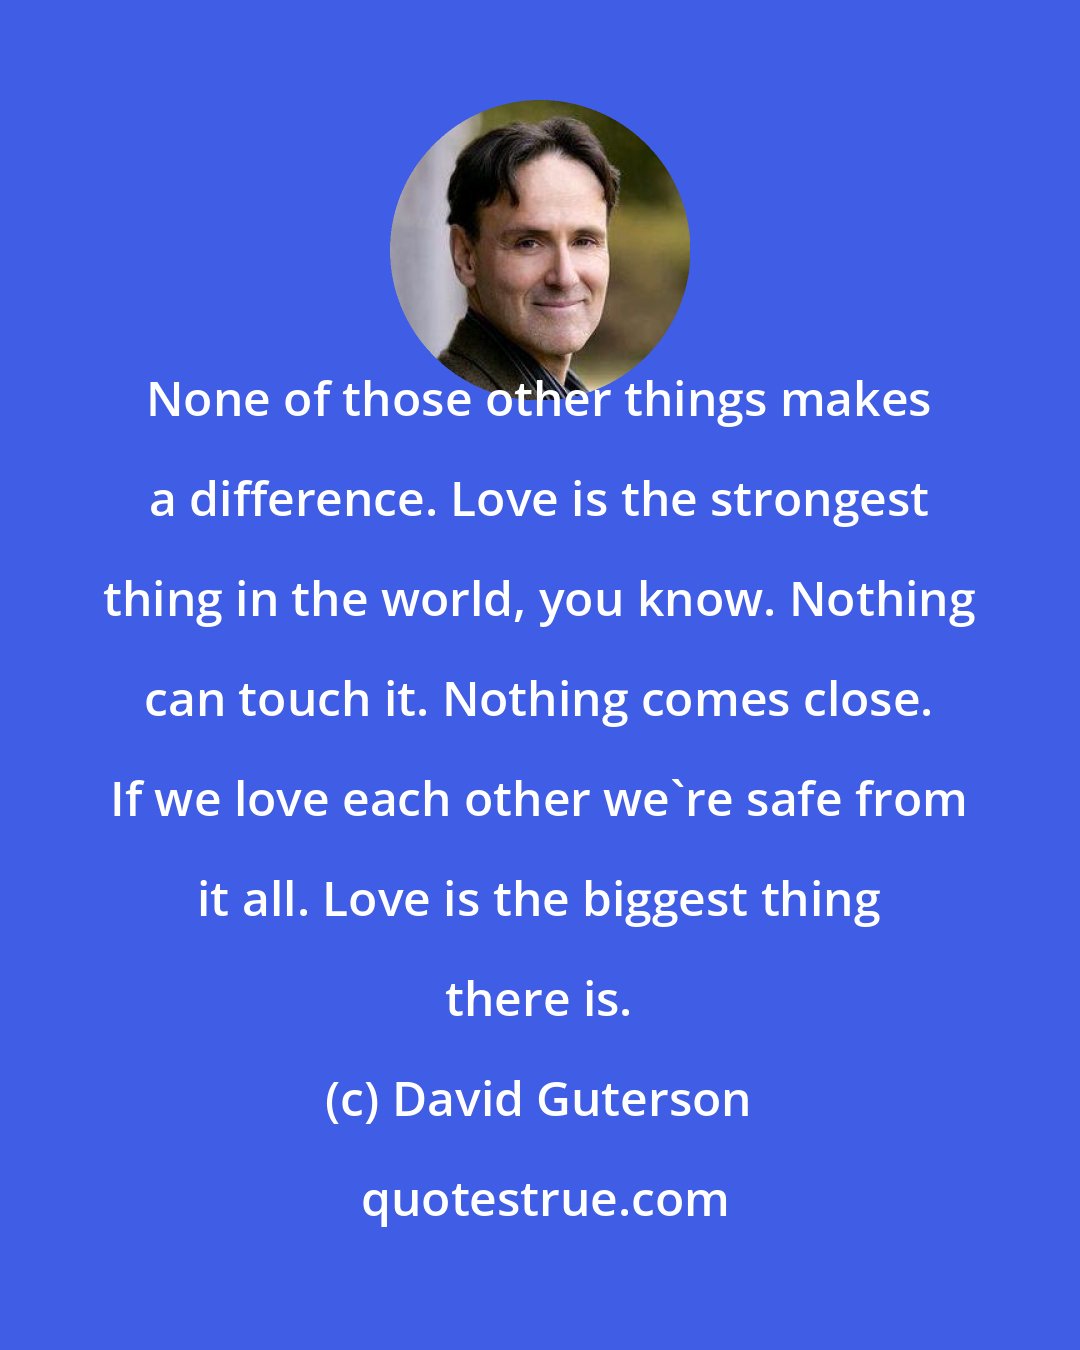 David Guterson: None of those other things makes a difference. Love is the strongest thing in the world, you know. Nothing can touch it. Nothing comes close. If we love each other we're safe from it all. Love is the biggest thing there is.